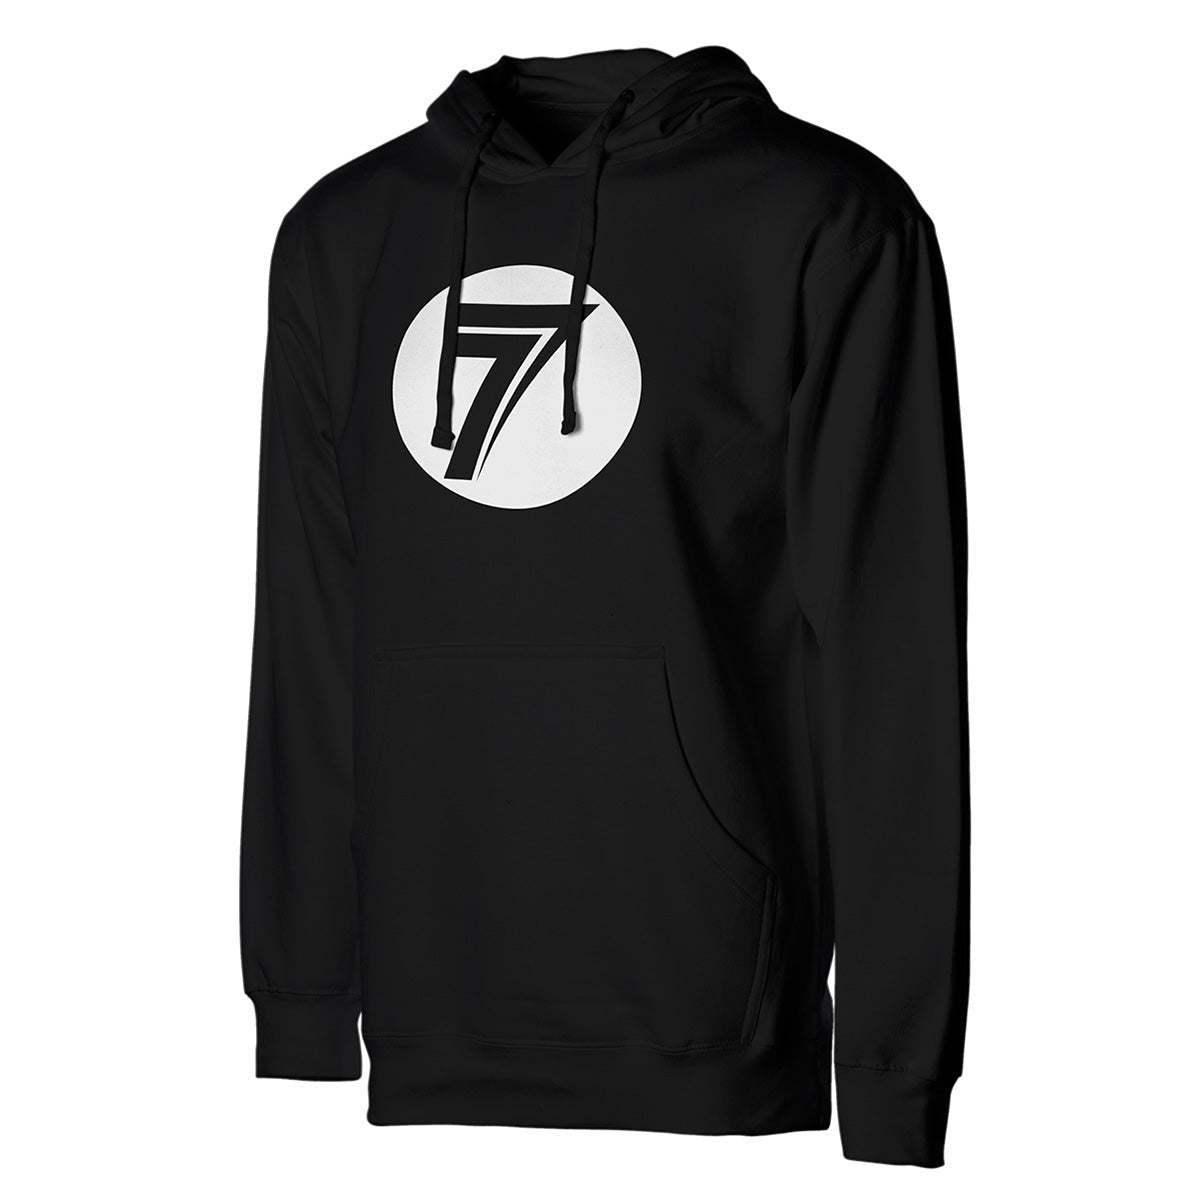 Seven Youth Dot Hoodie 1180004-001-YS